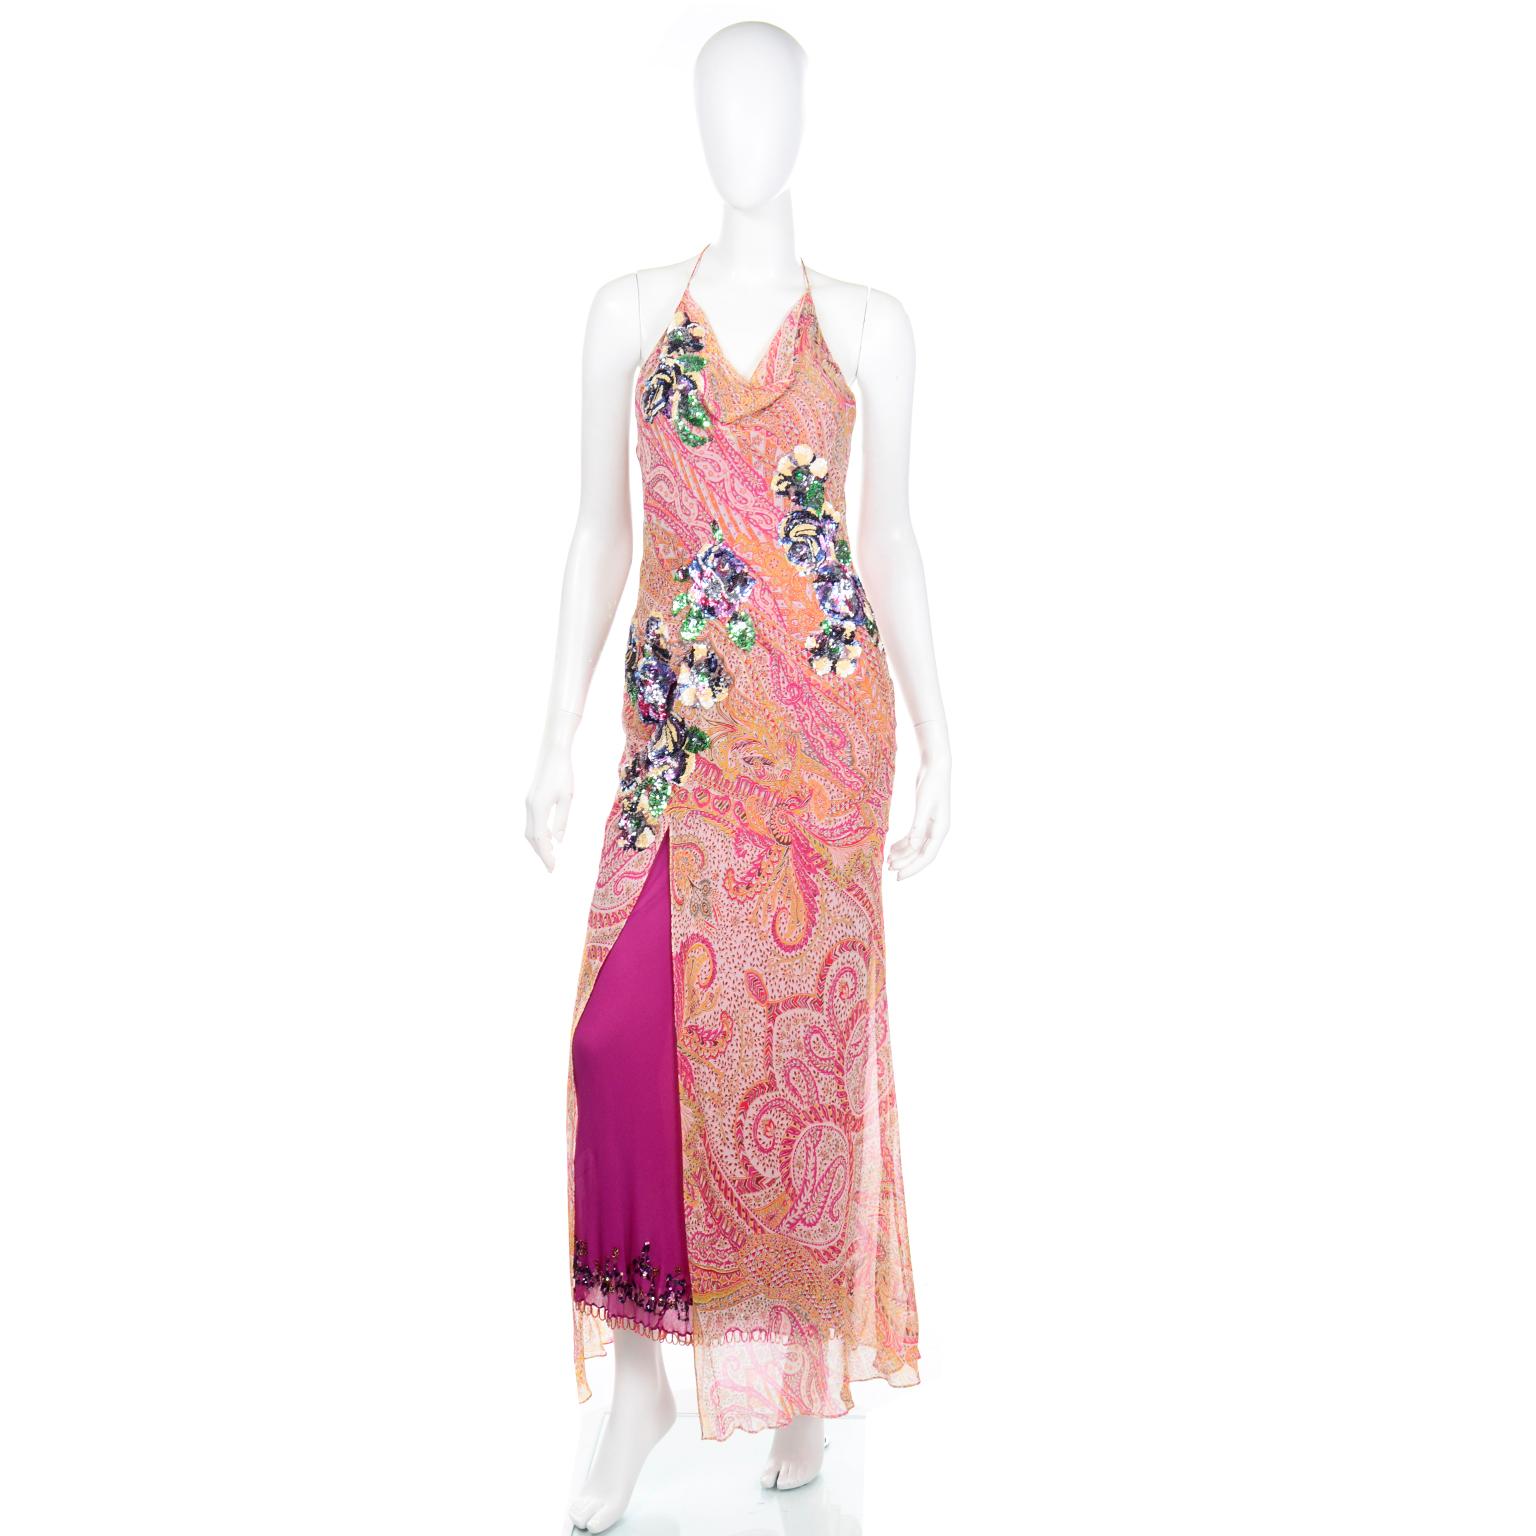 This vintage Y2K Jenny Packham slip dress would make a perfect modern evening gown! This gorgeous silk slip dress is in a ultra fine, semi sheer paisley print in shades of magenta, orange, yellow, brown, grey and red. We love the pretty magenta pink